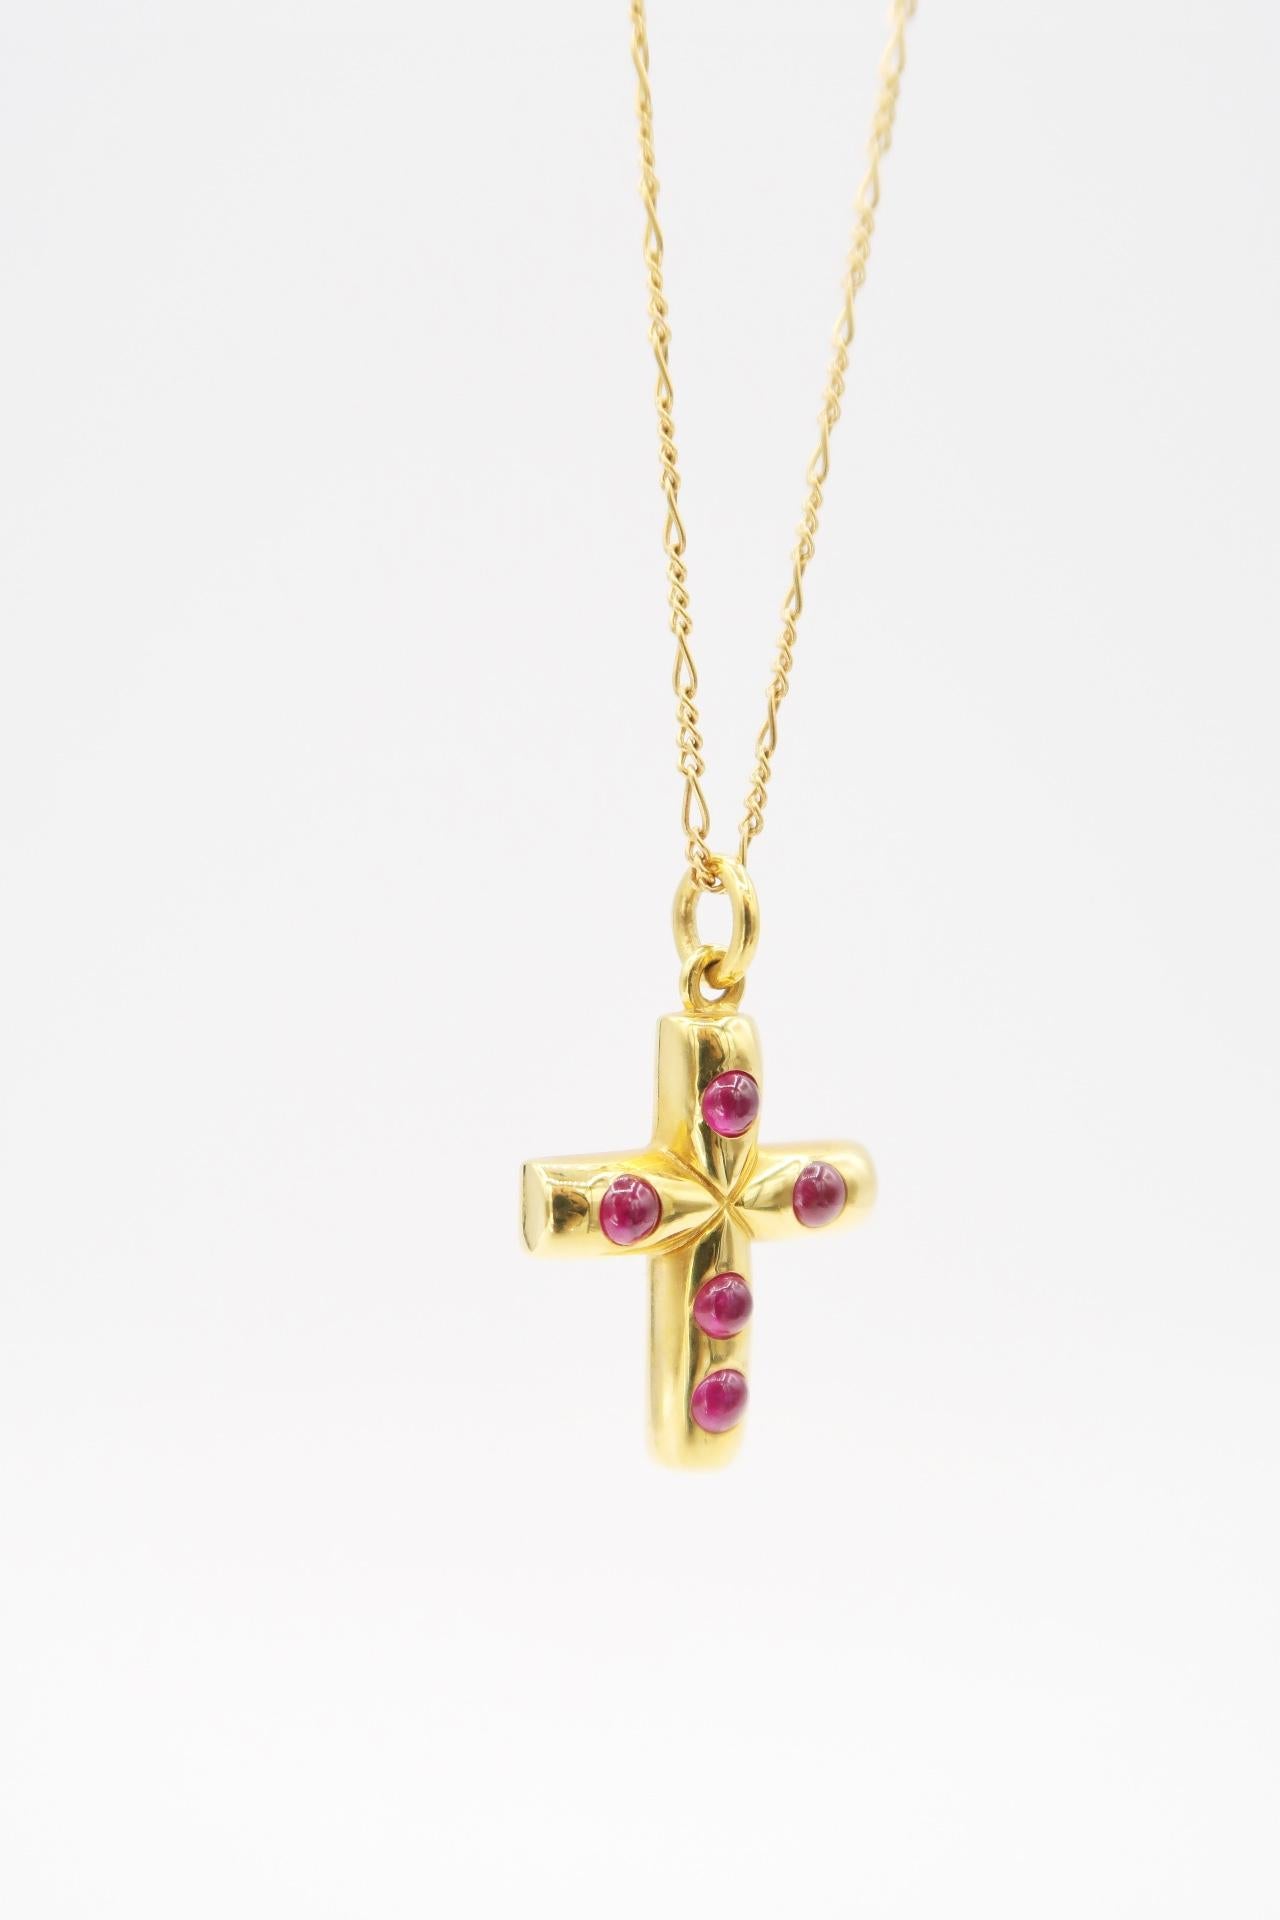 1.78 Carat Cabochon Ruby 18K Yellow Gold Cross Delicate Figaro Chain Necklace

Gold: 18K Yellow Gold, 6.413 g
Ruby: 1.78 ct

Chain length: 17 inches
Pendant dimensions: 17.5mm x 27mm